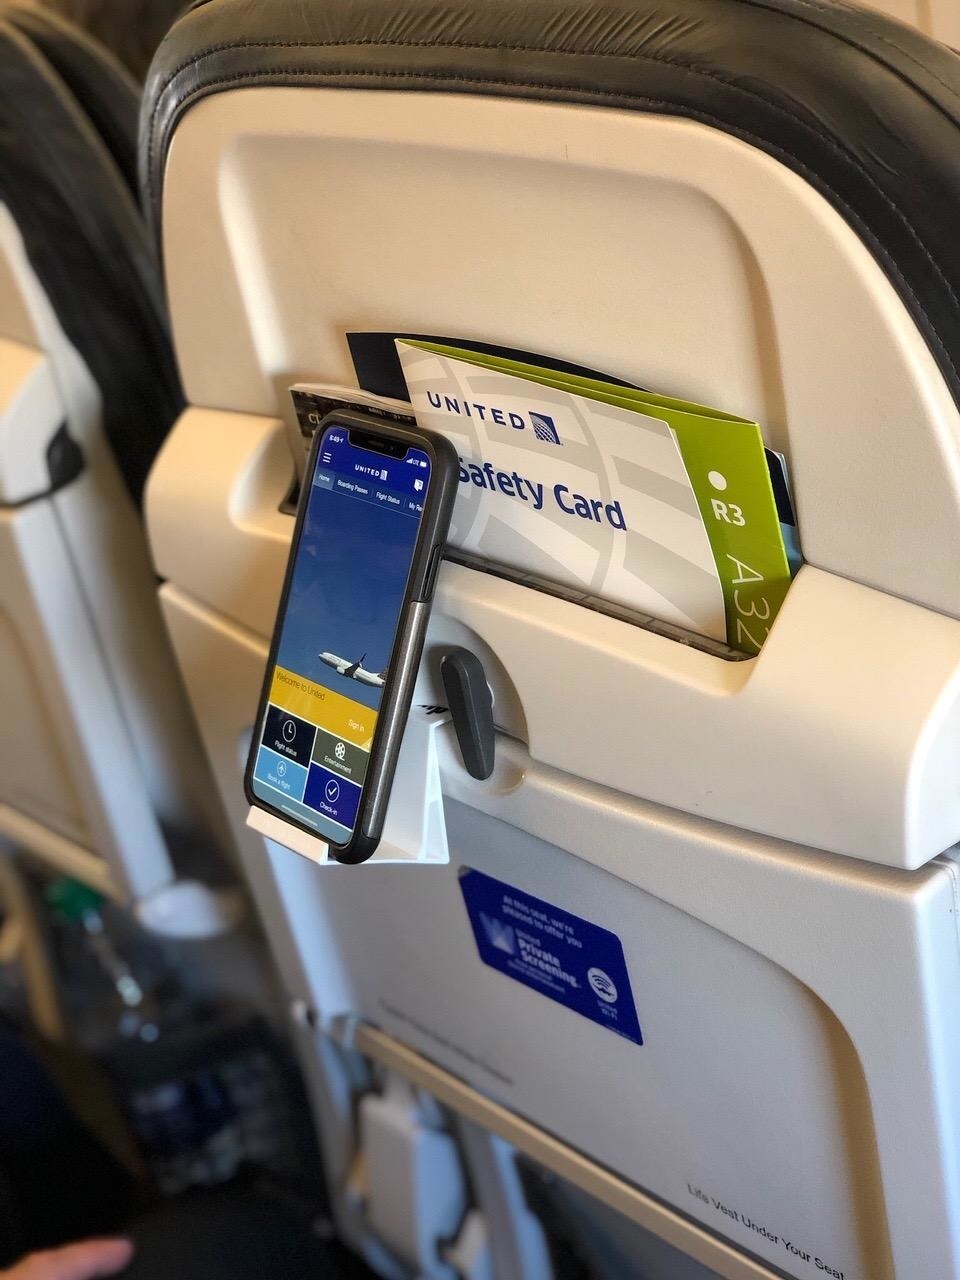 reviewer image of a phone mounted in the SkyClip on a plane